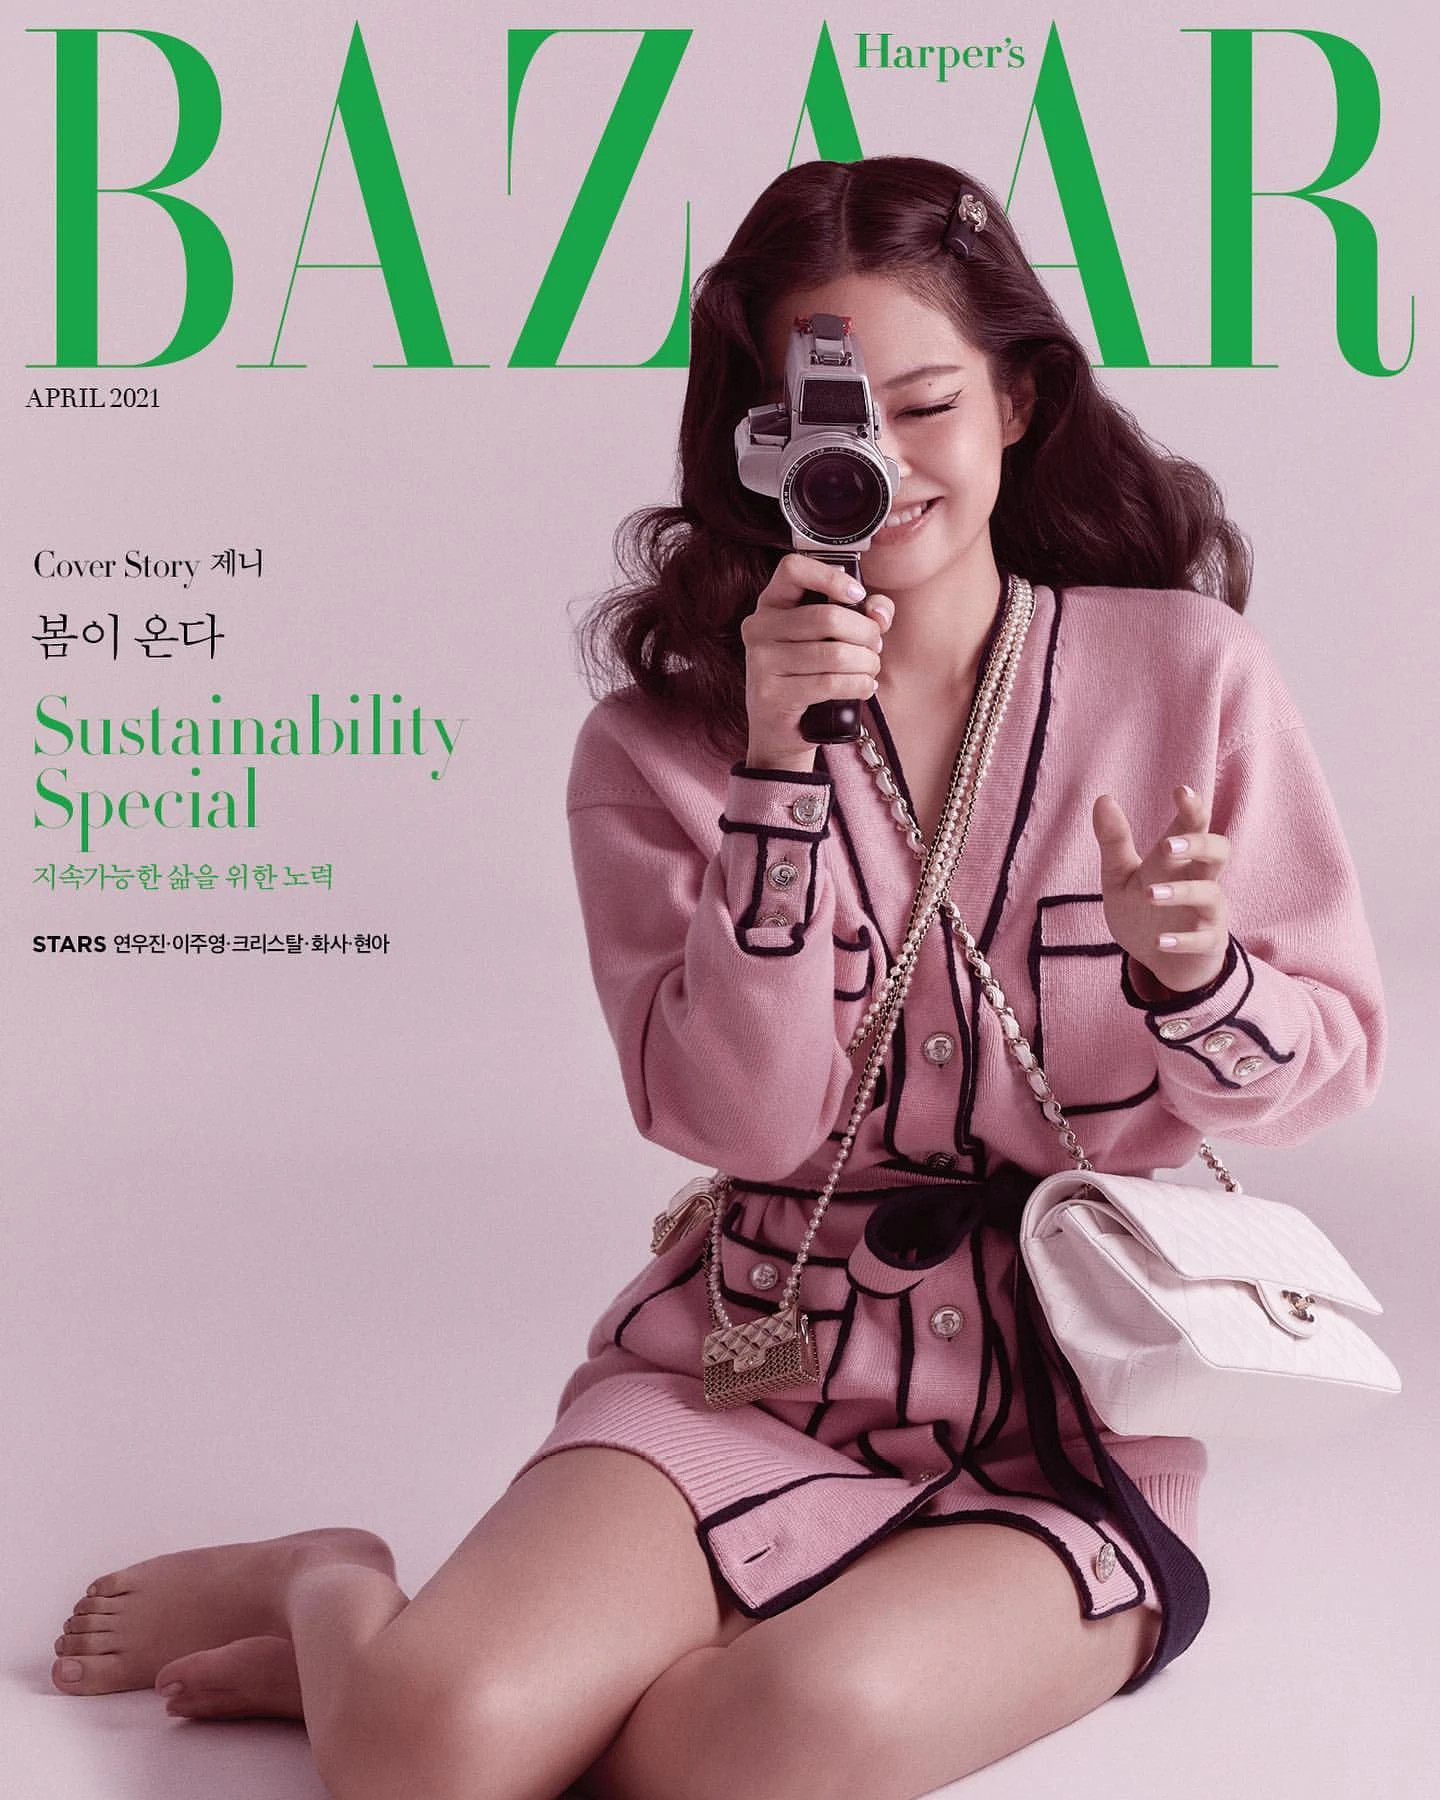 on X: 190430 HARPER'S BAZAAR Indonesia Article mentioned #JENNIE